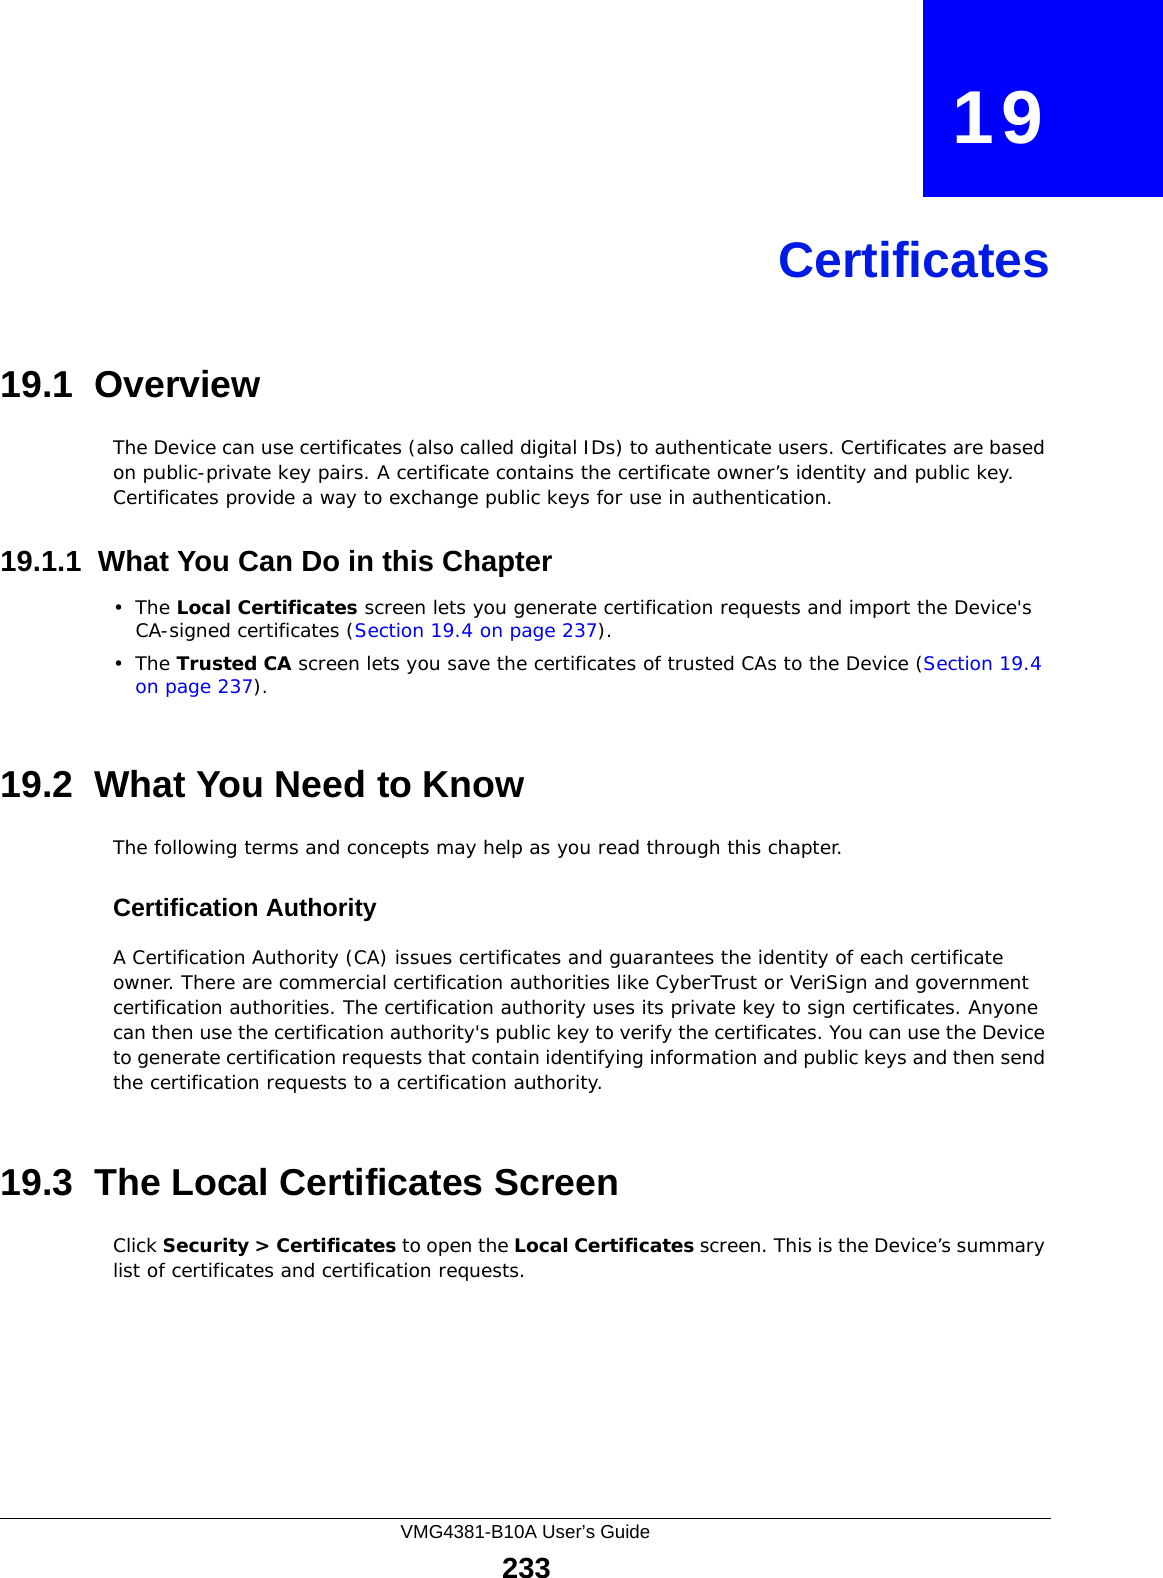 VMG4381-B10A User’s Guide233CHAPTER   19Certificates19.1  OverviewThe Device can use certificates (also called digital IDs) to authenticate users. Certificates are based on public-private key pairs. A certificate contains the certificate owner’s identity and public key. Certificates provide a way to exchange public keys for use in authentication. 19.1.1  What You Can Do in this Chapter•The Local Certificates screen lets you generate certification requests and import the Device&apos;s CA-signed certificates (Section 19.4 on page 237).•The Trusted CA screen lets you save the certificates of trusted CAs to the Device (Section 19.4 on page 237).19.2  What You Need to KnowThe following terms and concepts may help as you read through this chapter.Certification Authority A Certification Authority (CA) issues certificates and guarantees the identity of each certificate owner. There are commercial certification authorities like CyberTrust or VeriSign and government certification authorities. The certification authority uses its private key to sign certificates. Anyone can then use the certification authority&apos;s public key to verify the certificates. You can use the Device to generate certification requests that contain identifying information and public keys and then send the certification requests to a certification authority.19.3  The Local Certificates ScreenClick Security &gt; Certificates to open the Local Certificates screen. This is the Device’s summary list of certificates and certification requests. 